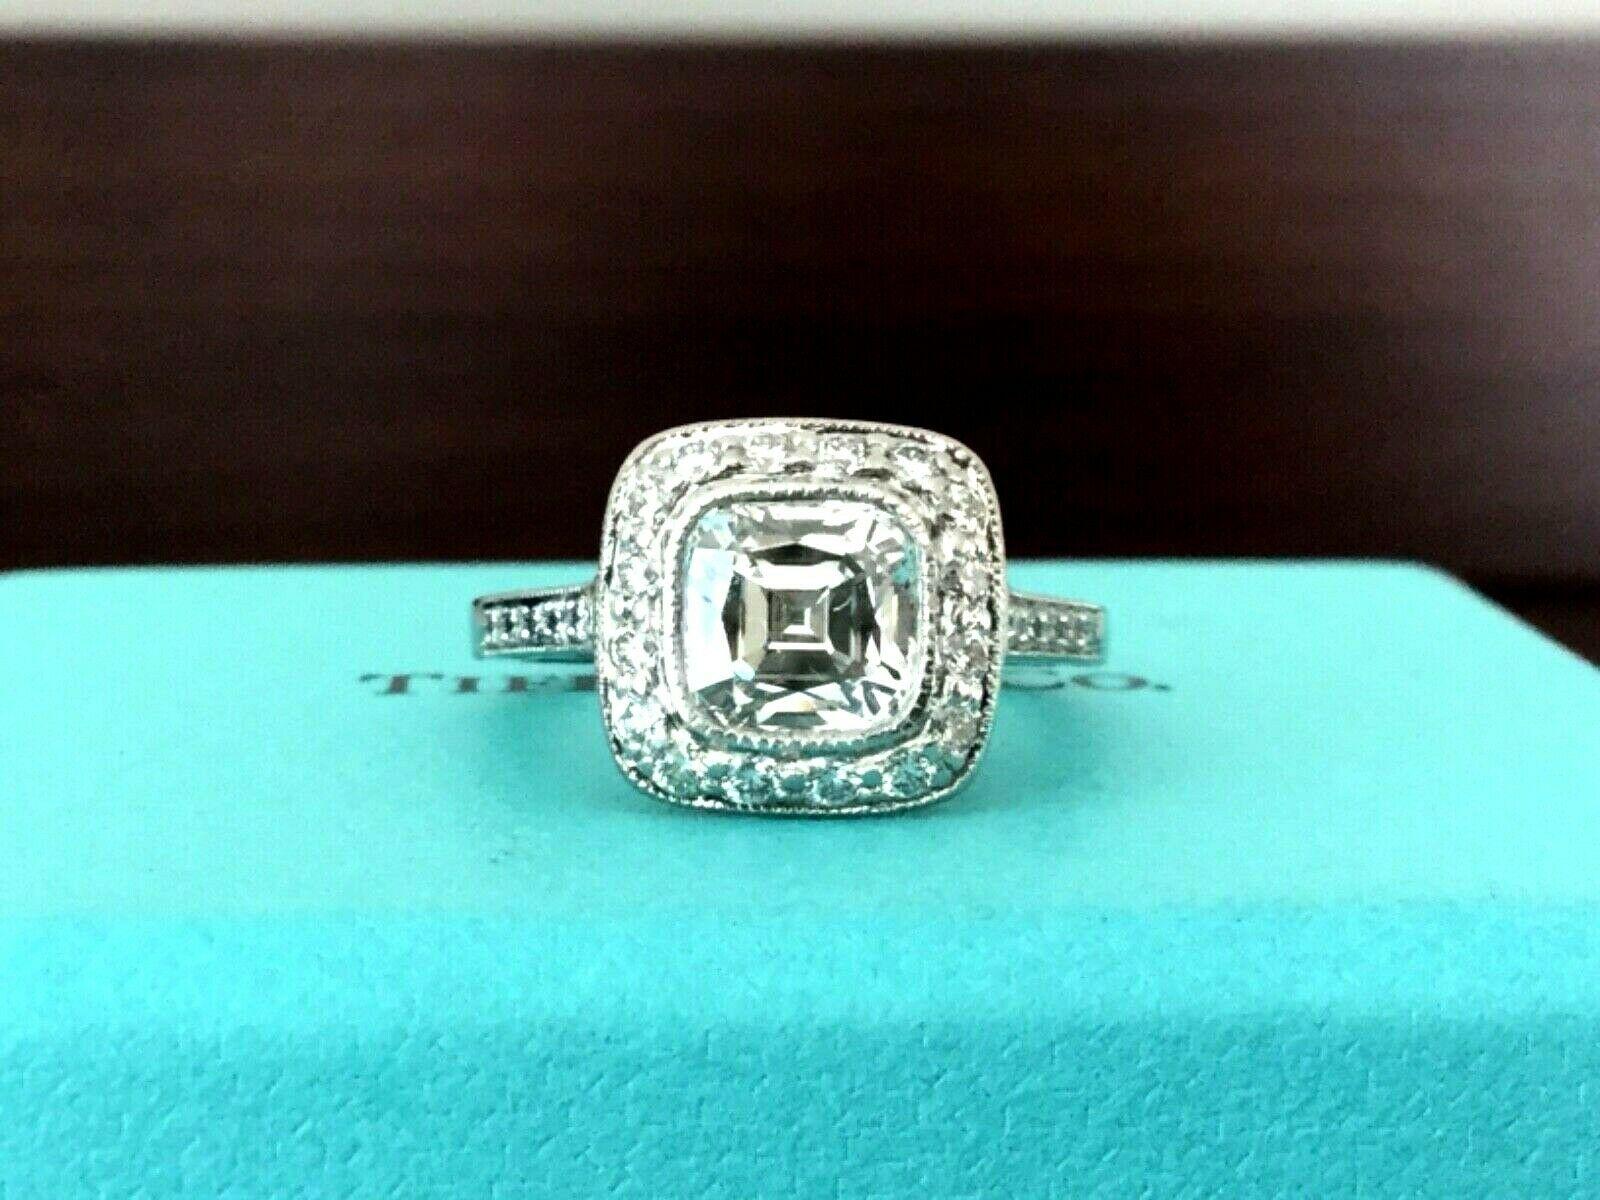 Being offered for your consideration is an amazing Tiffany & Co Platinum and Diamond 1.29 carat (1.71 TOTAL CARAT WEIGHT) natural cushion cut diamond engagement ring set in the classic LEGACY pave diamond band..  The diamond is HUGE on this amazing